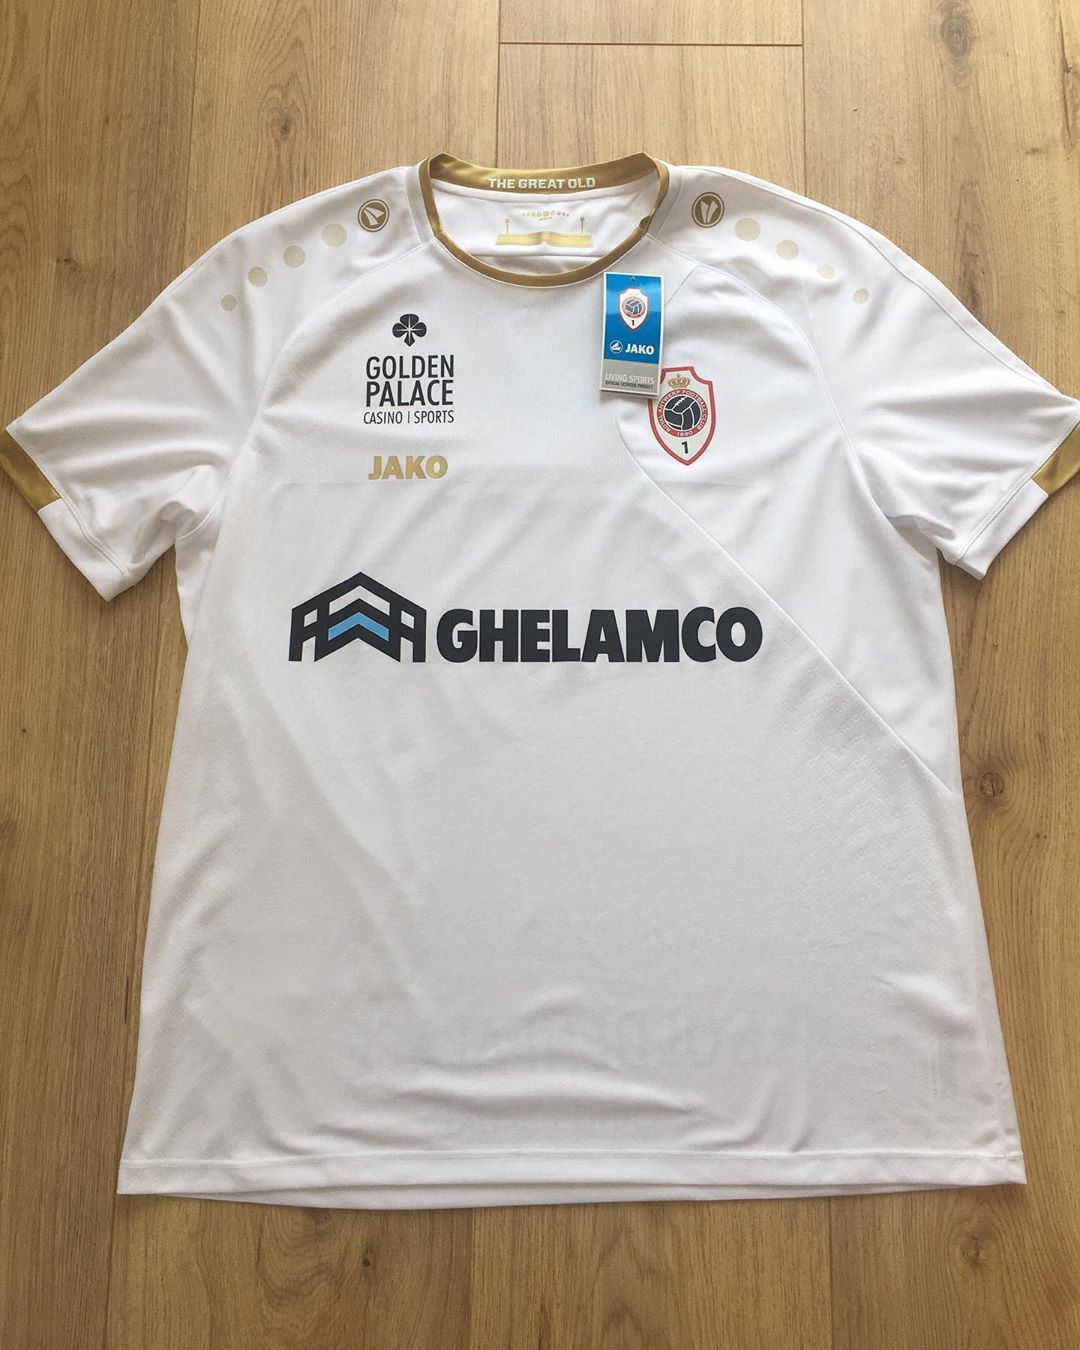 Royal Antwerp F.C. Away 2019/2020 Football Shirt Manufactured By Jako. The club plays football in Belgium.